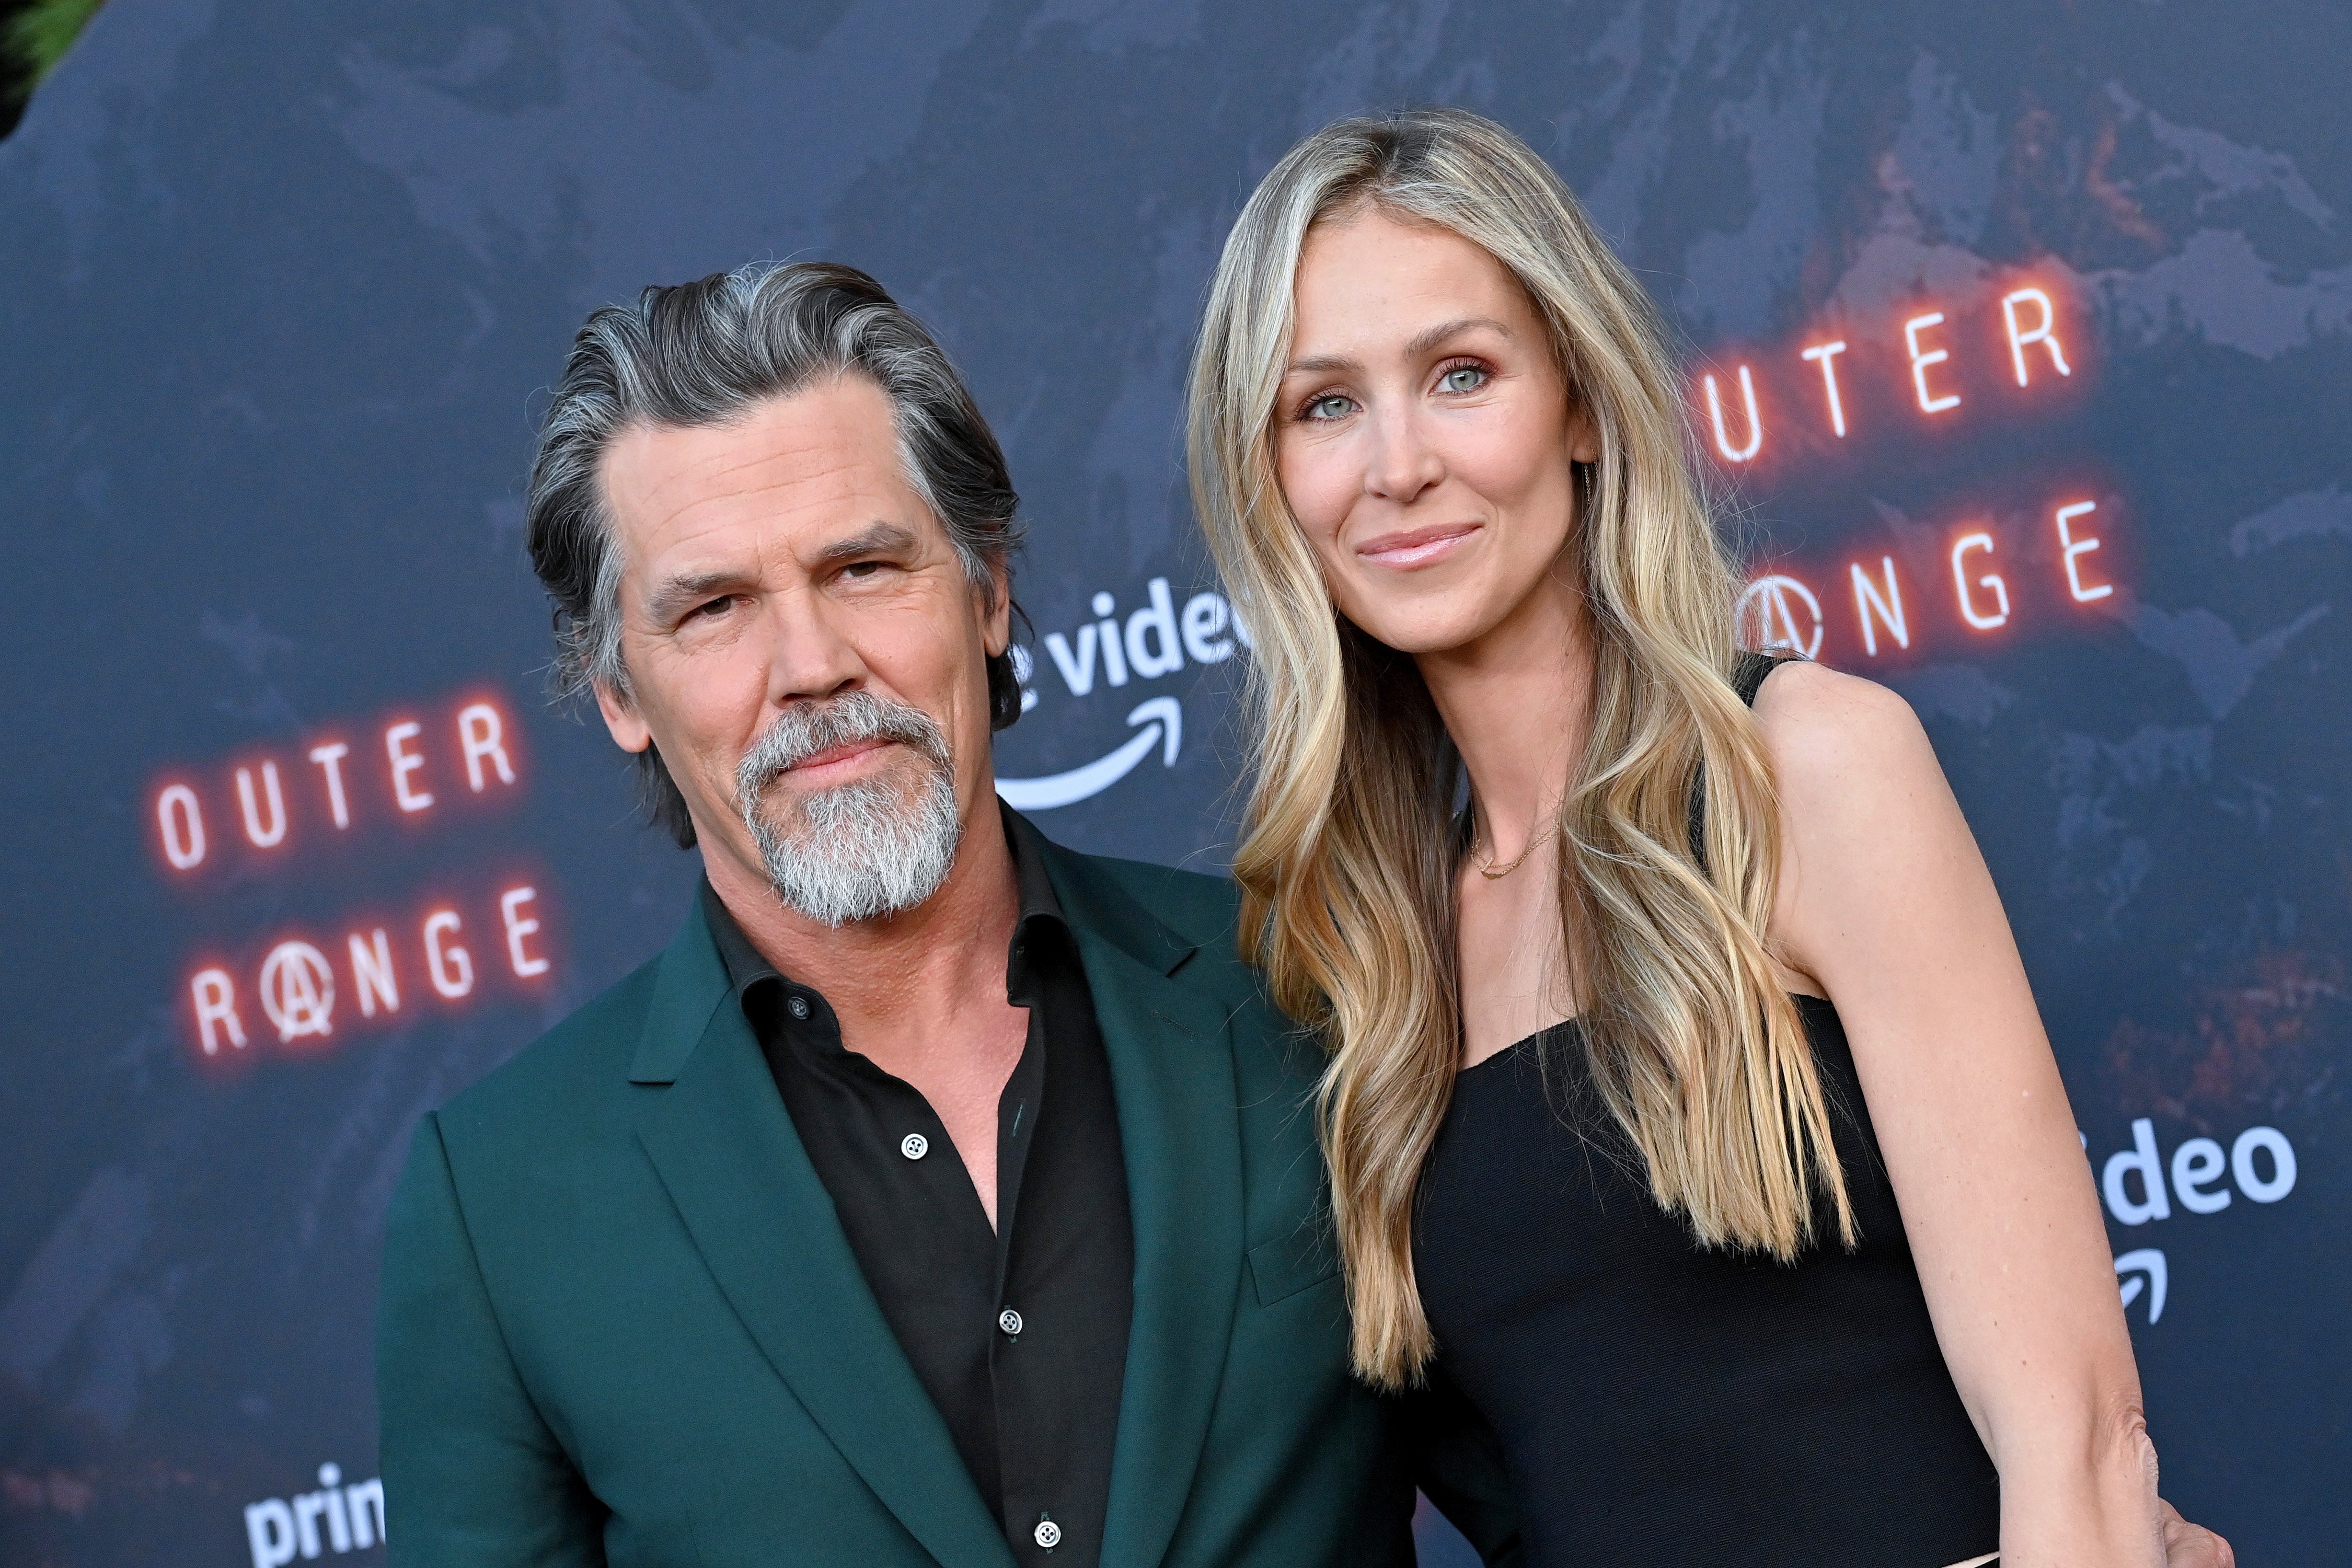 Josh Brolin and Kathryn Boyd Brolin attend the Los Angeles Premiere of Prime Video's Western "Outer Range" at Harmony Gold on April 07, 2022 in Los Angeles, California. | Source: Getty Images